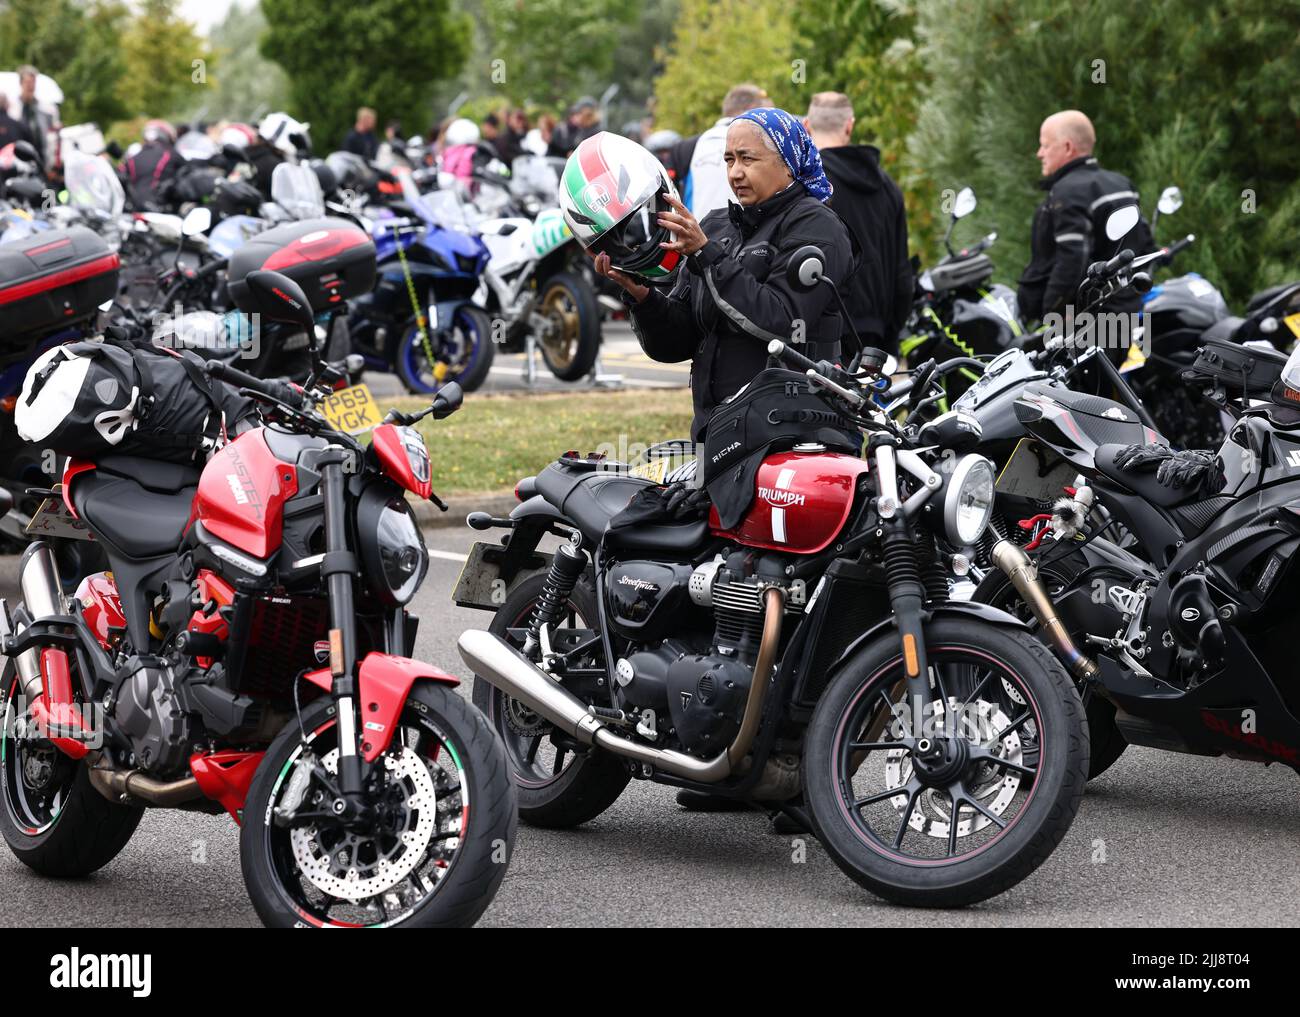 Hinckley, Leicestershire, UK. 24th July 2022. A rider puts on her crash helmet during a World Record attempt for the largest Female biker meet at the global headquarters for Triumph Motorcycles. Credit Darren Staples/Alamy Live News. Stock Photo